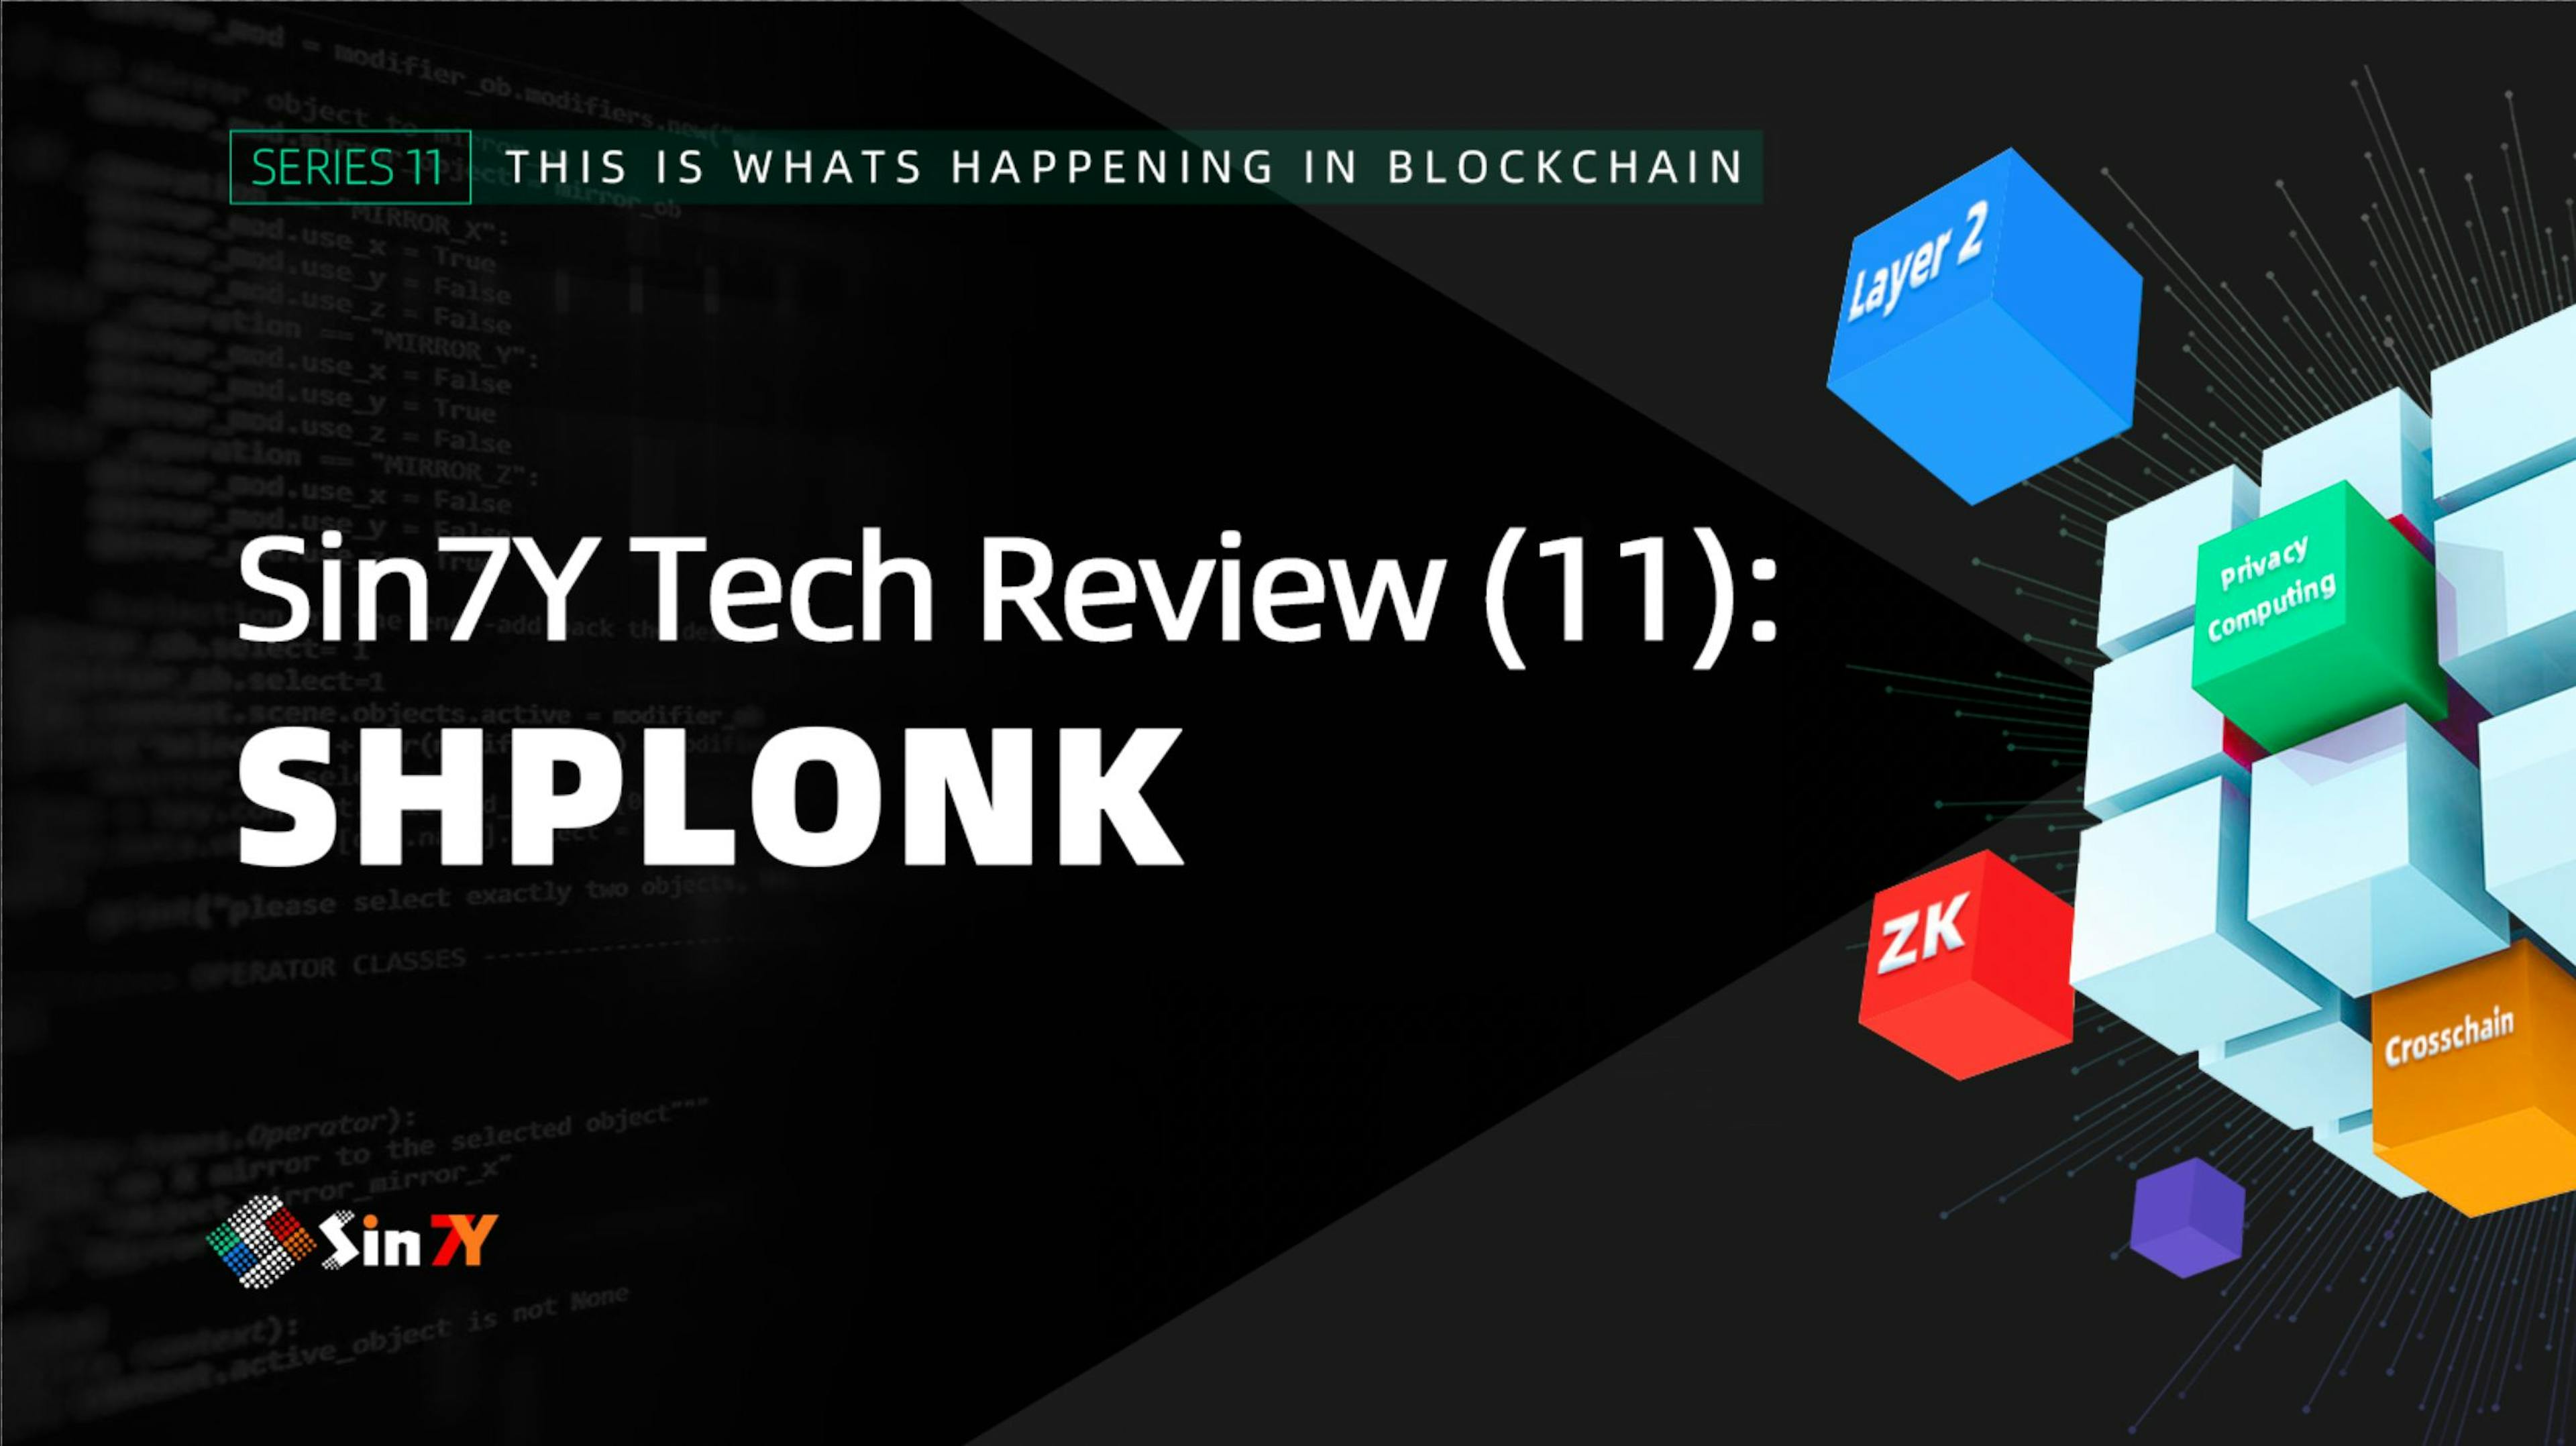 featured image - What is SHPLONK? - Sin7Y Tech Review (11)